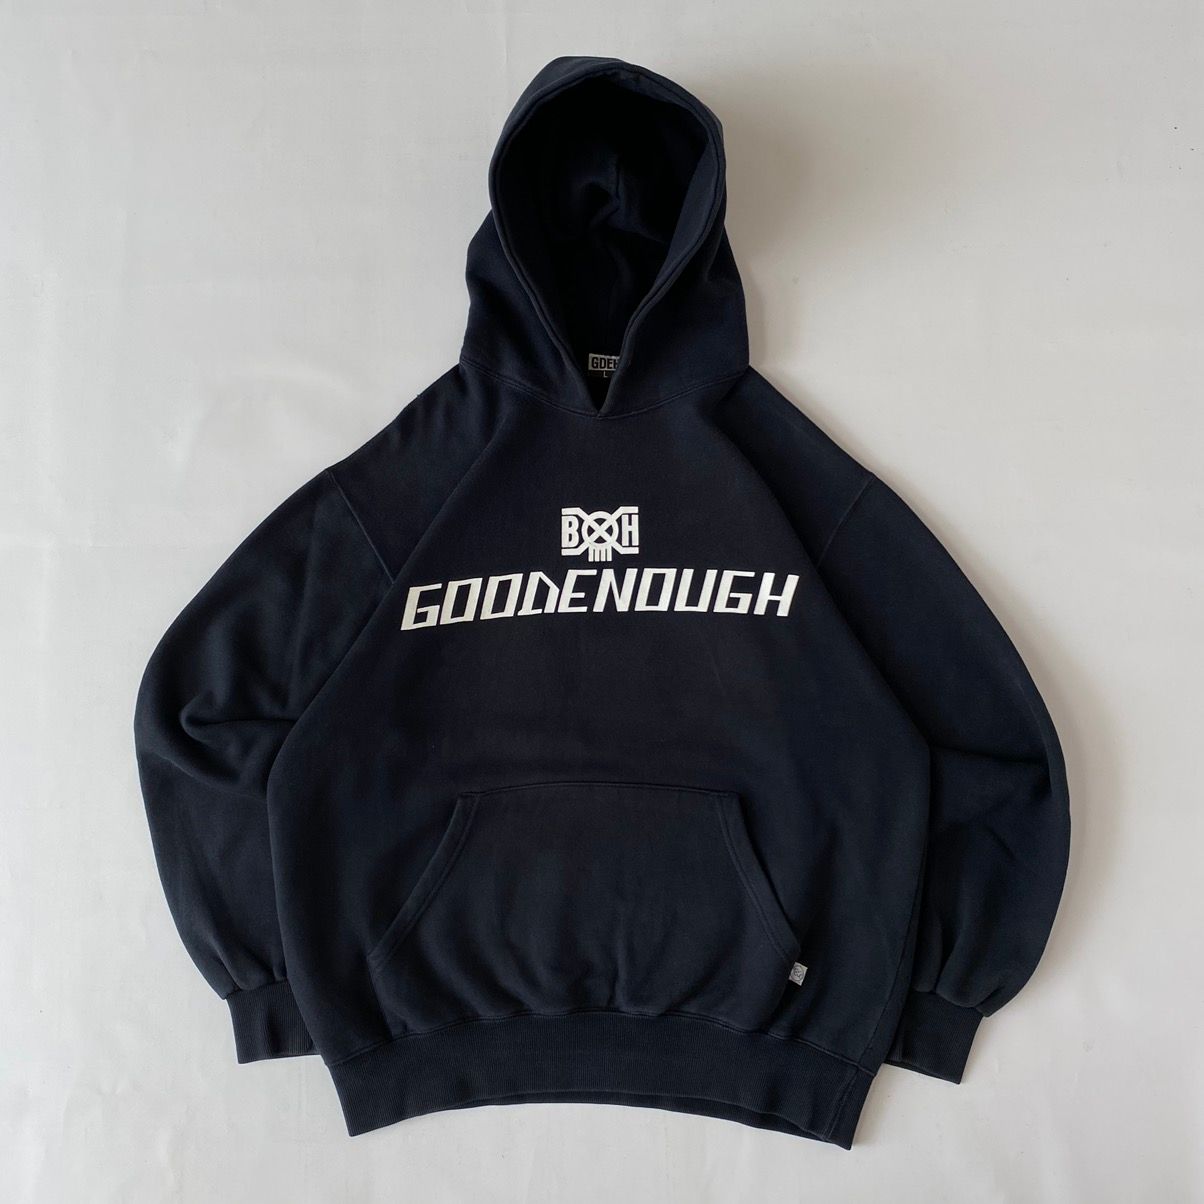 Vintage Goodenough x Bounty Hunter 01s hoodie | Grailed